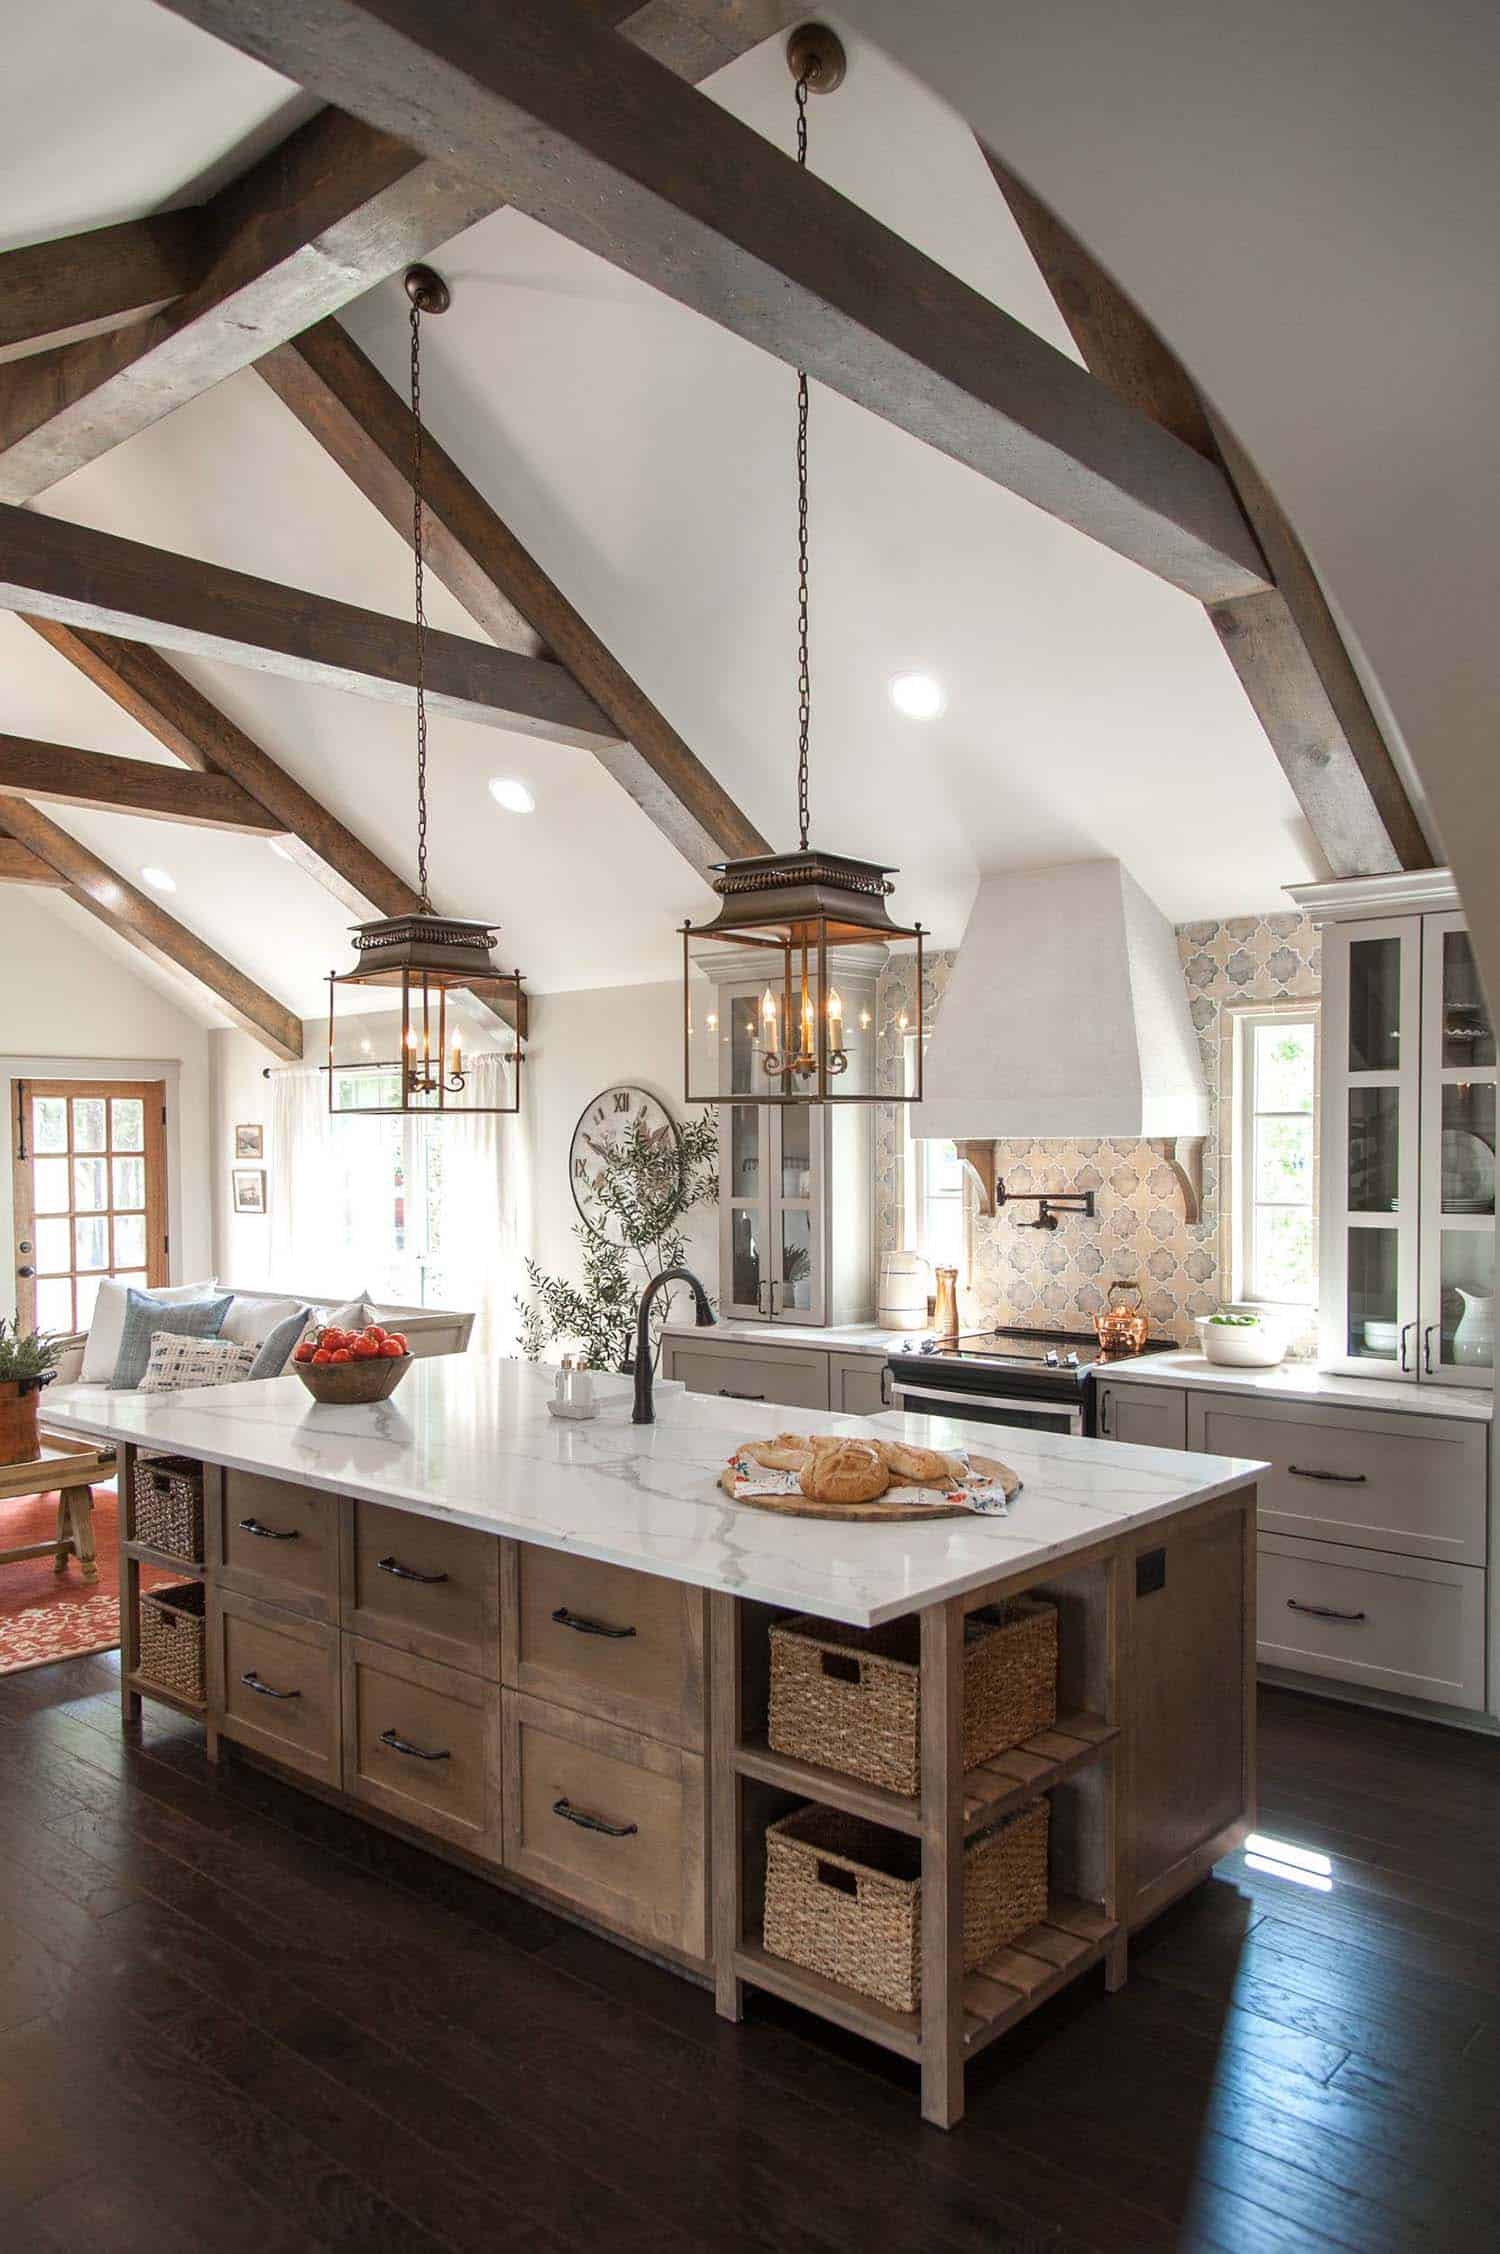 40 Unbelievable Rustic Kitchen Design Ideas To Steal